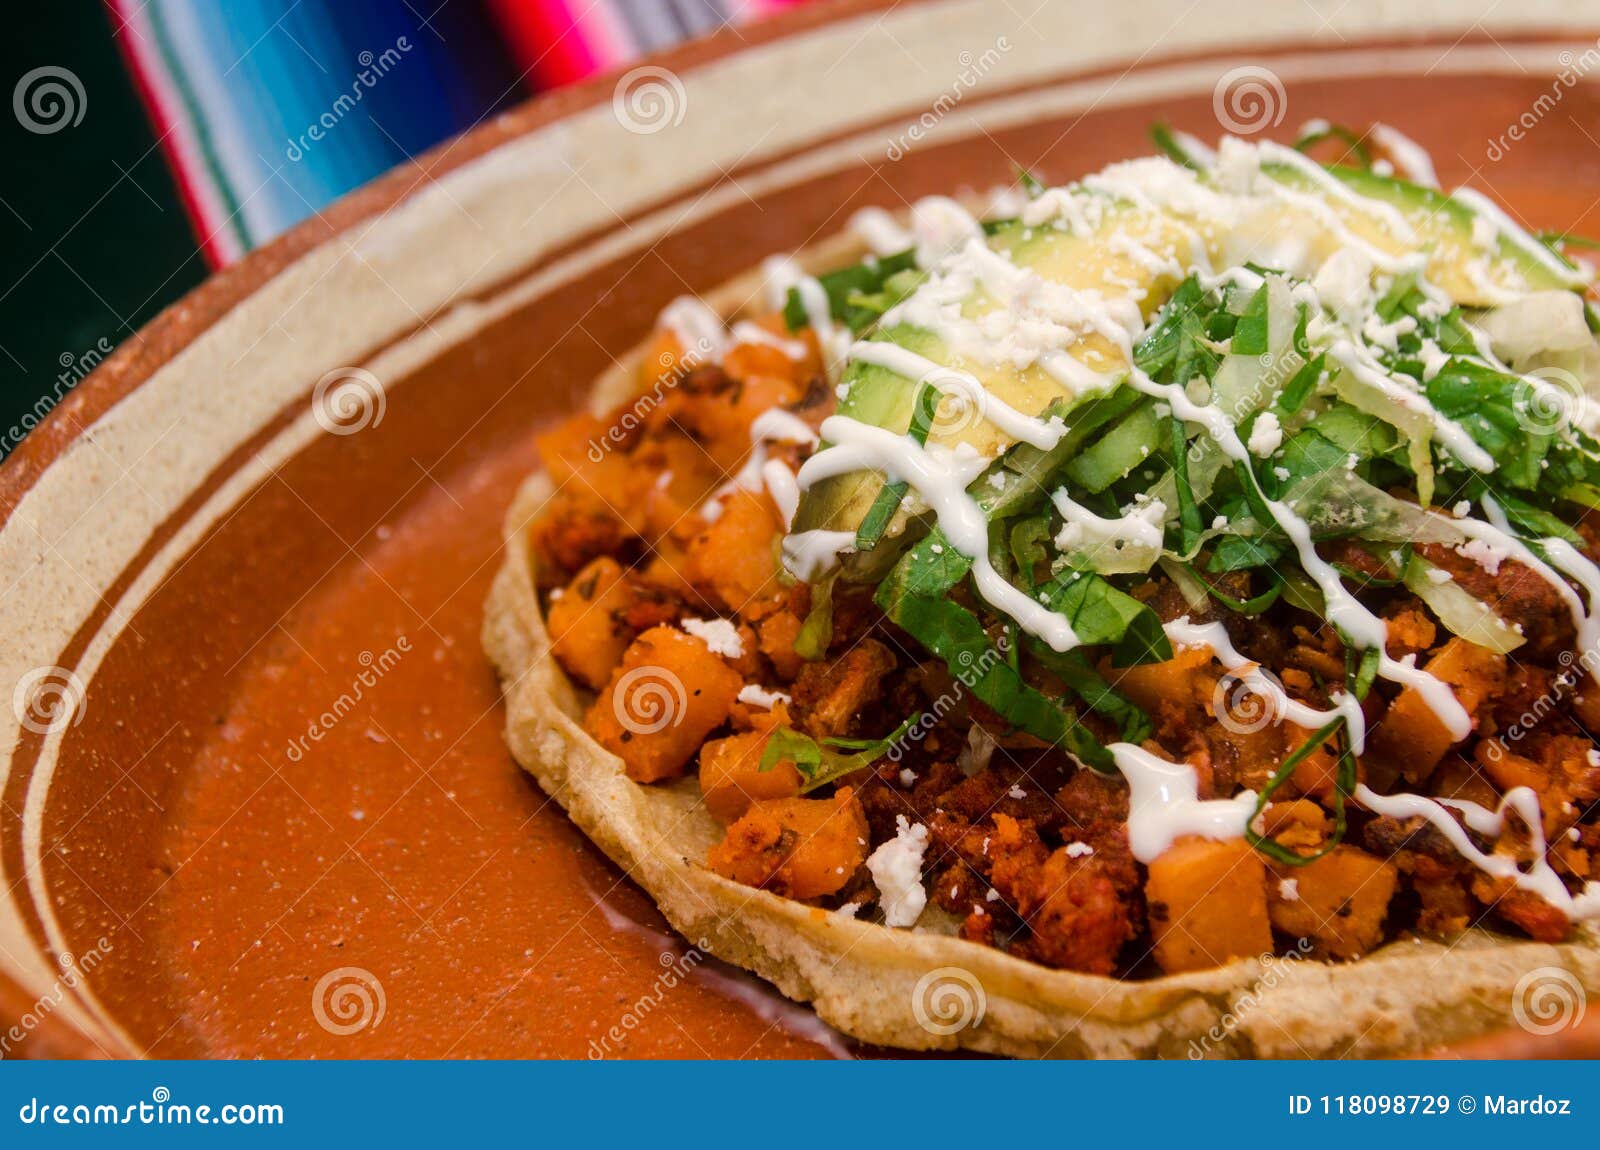 traditional mexican sope with chorizo